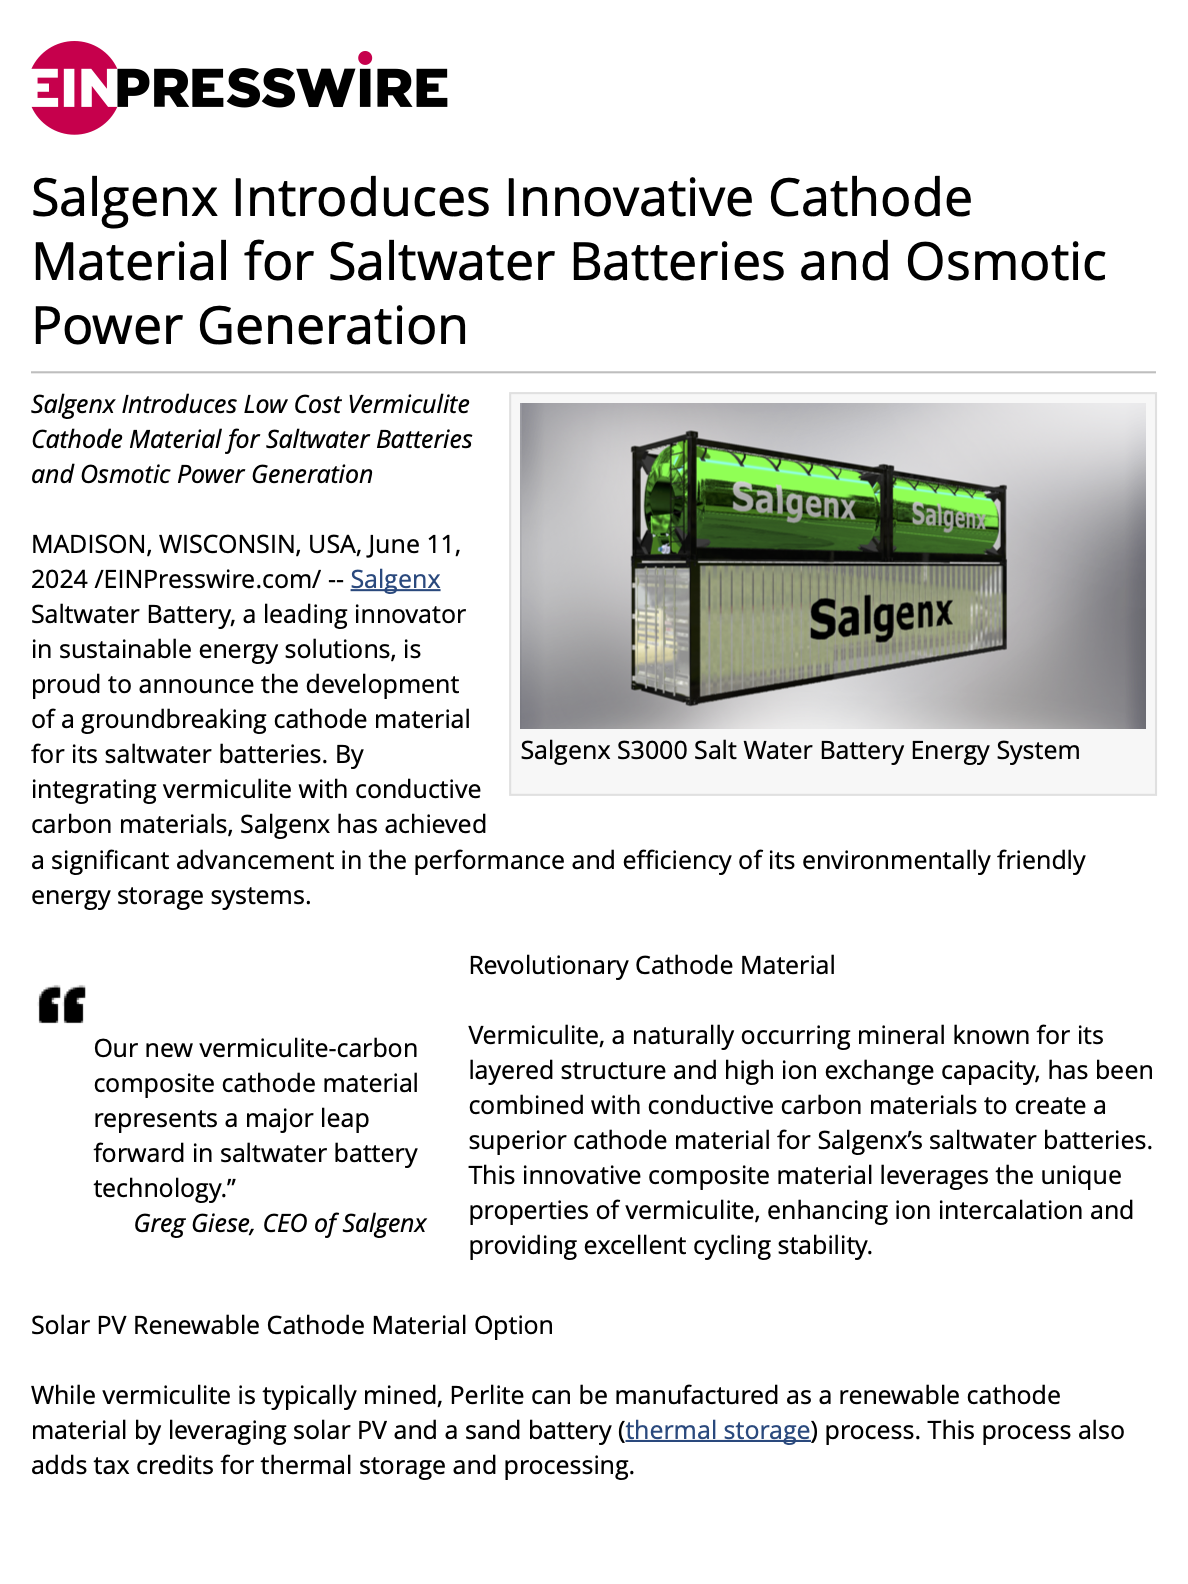 Salgenx Introduces Innovative Cathode Material for Saltwater Batteries and Osmotic Power Generation